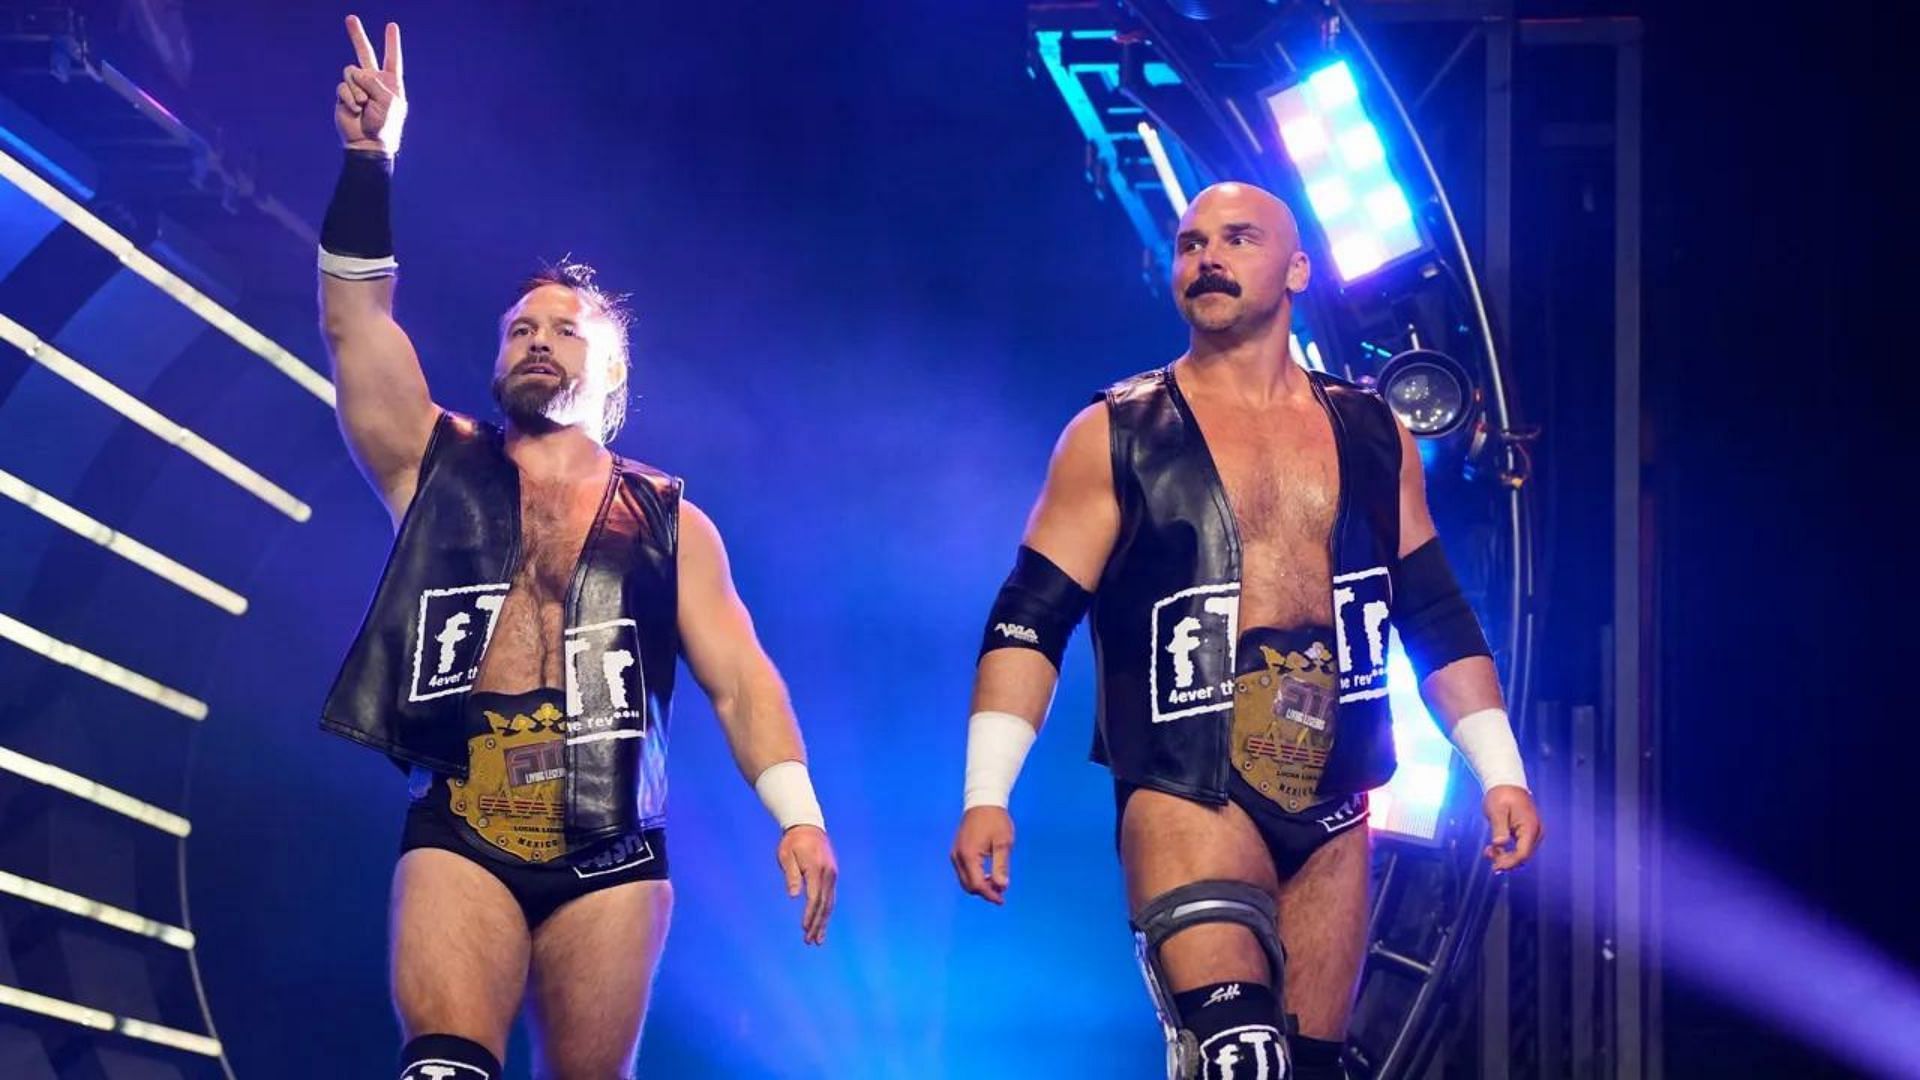 FTR are the current AEW Tag Team Champions